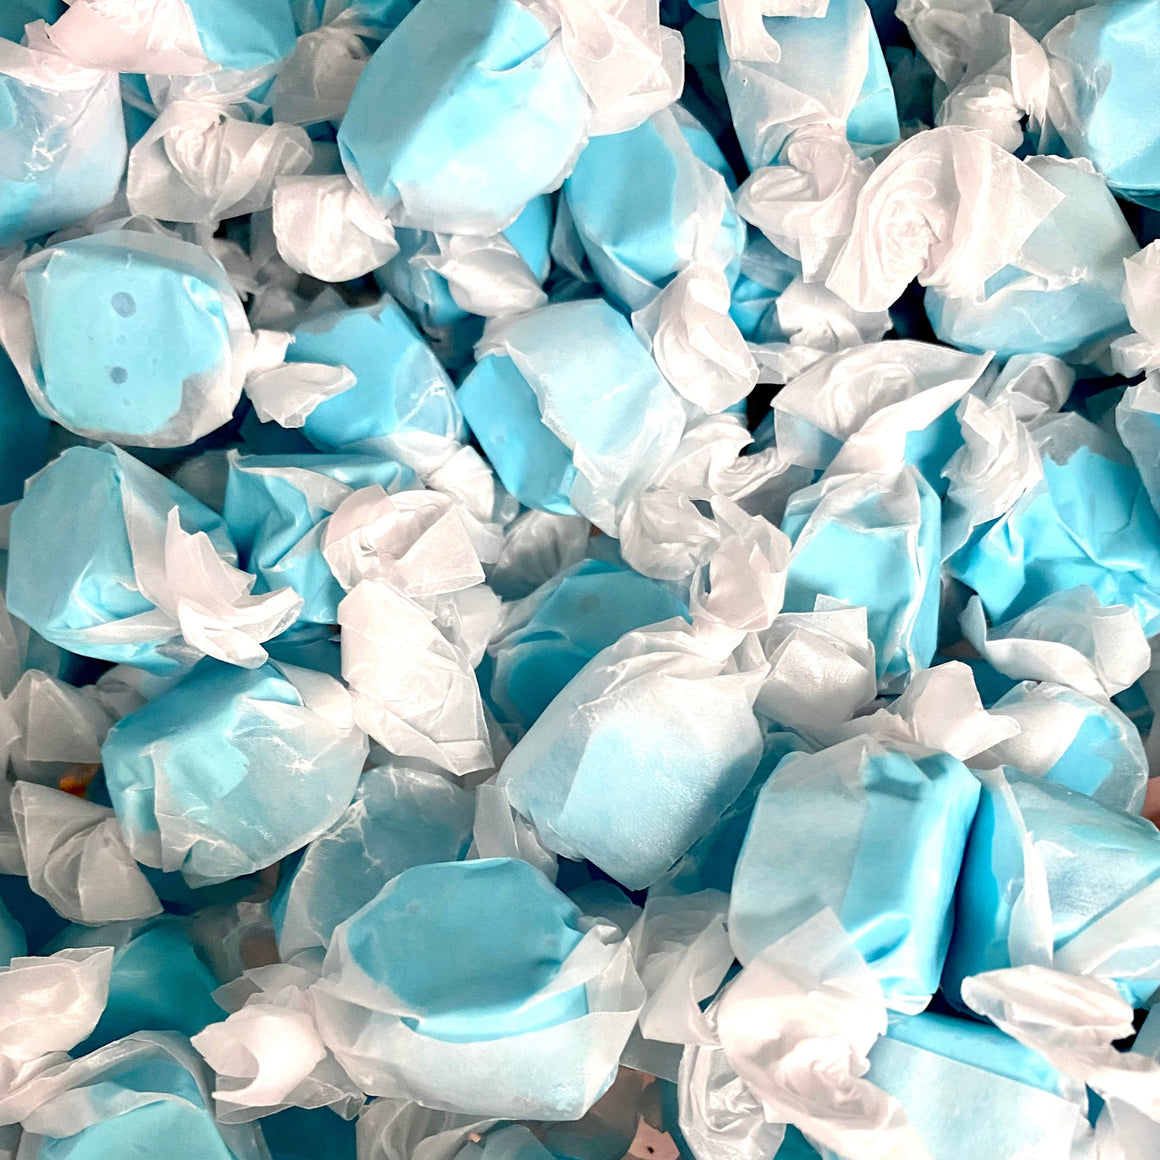 All City Candy Blue Raspberry Salt Water Taffy - 3 LB Bulk Bag Bulk Wrapped Sweet Candy Company Default Title For fresh candy and great service, visit www.allcitycandy.com